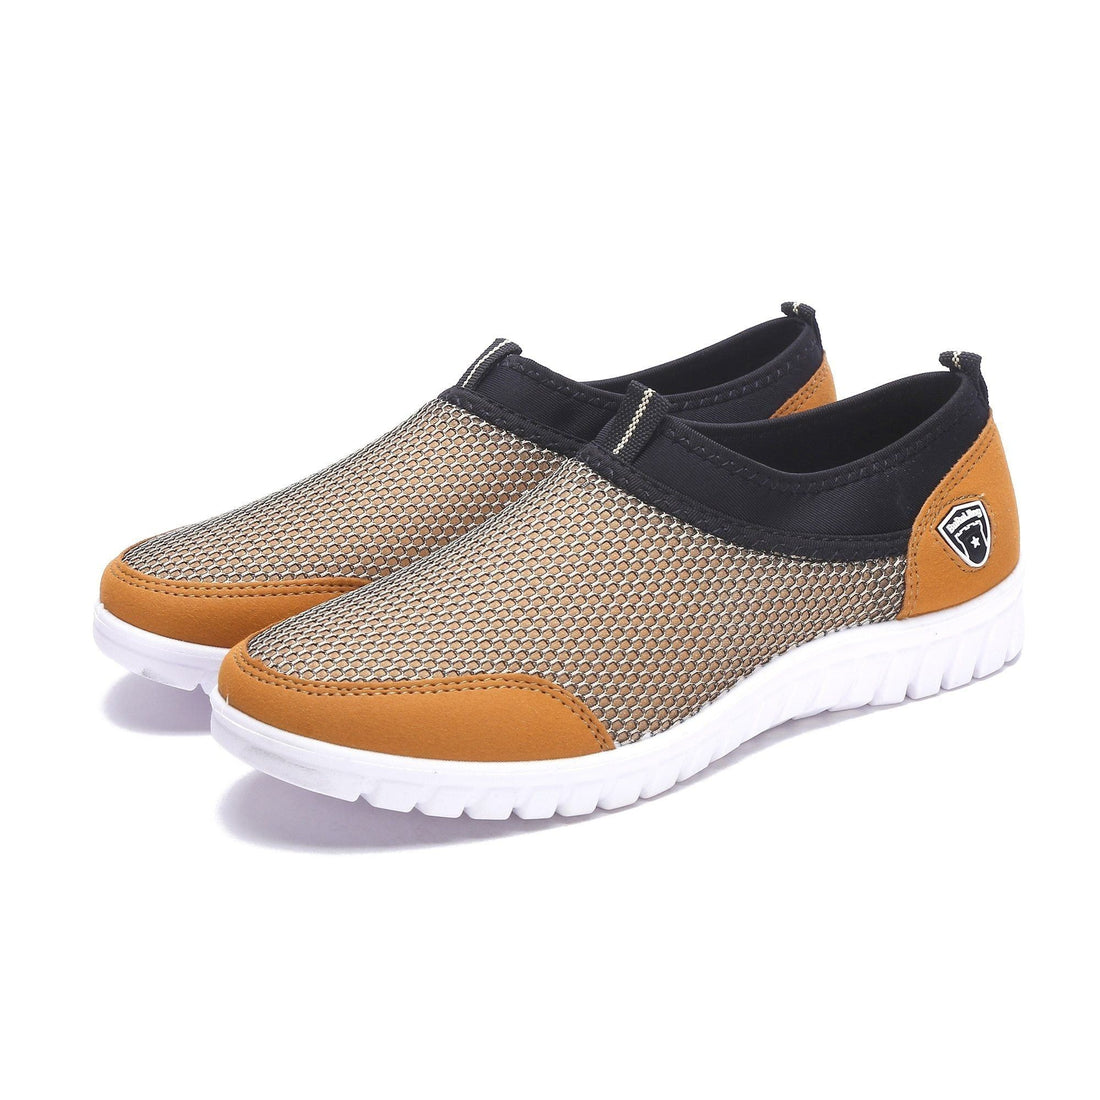 Breathable Men's Casual Shoes: Lightweight Sneakers for Running